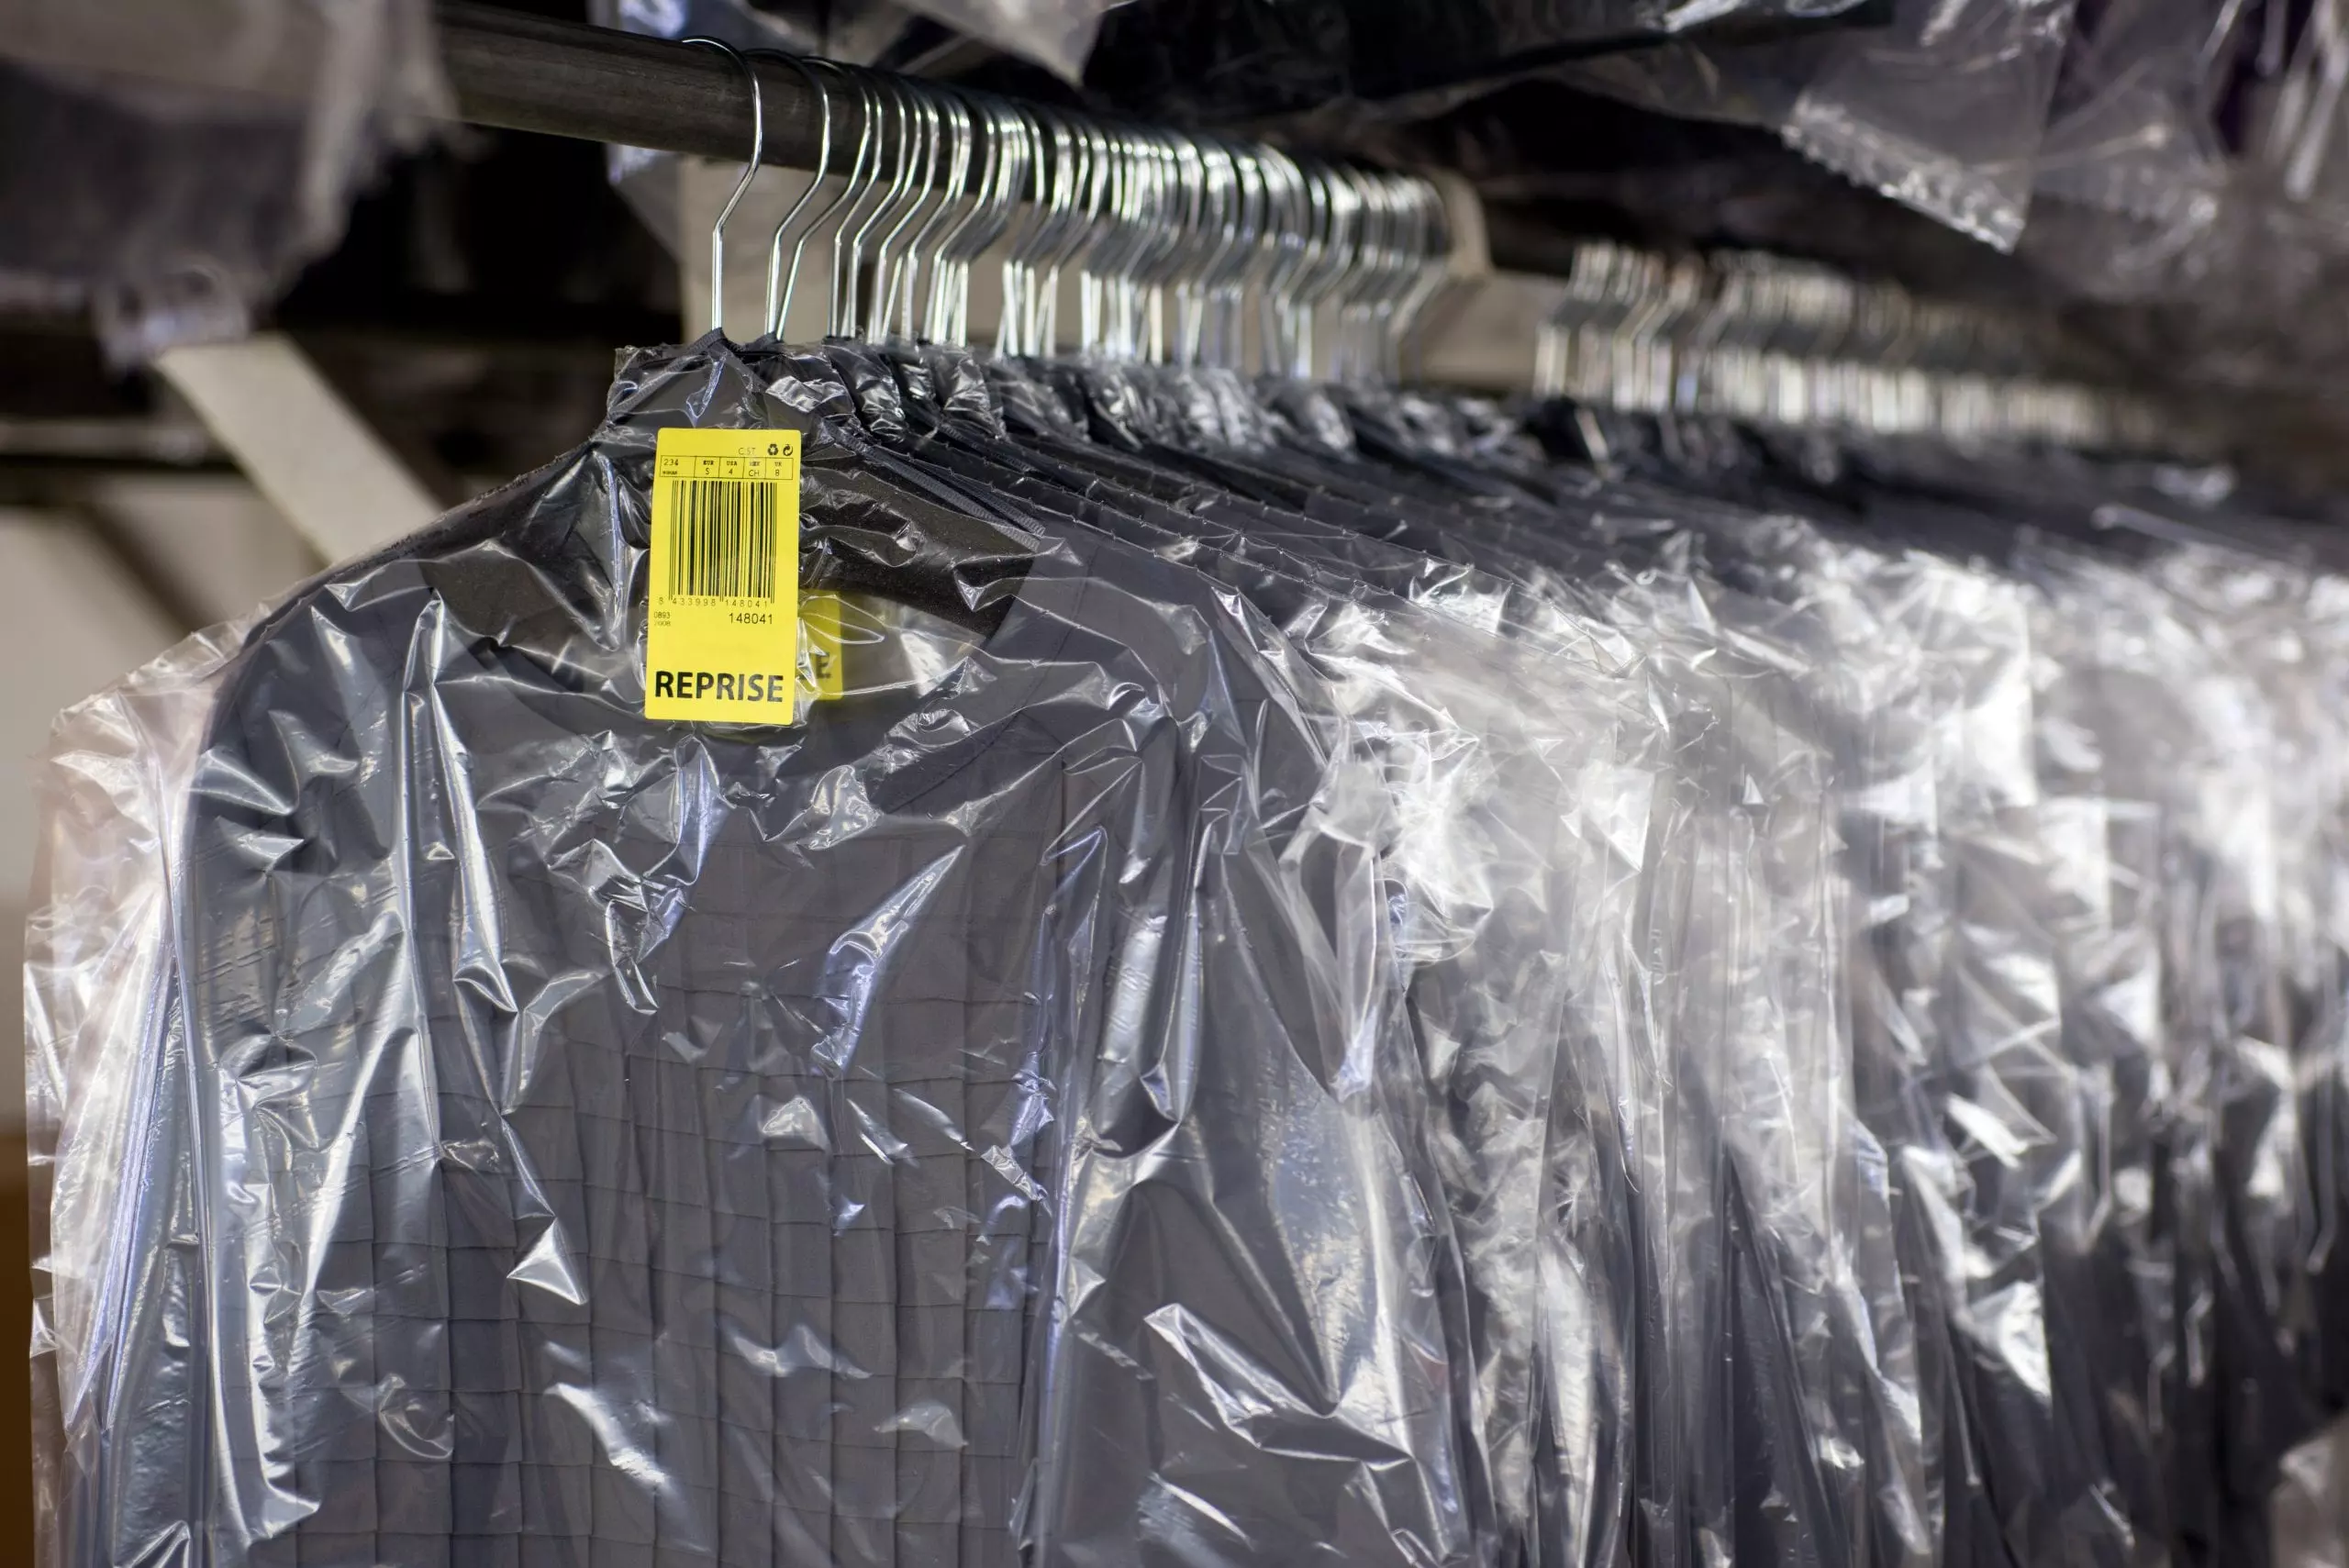 Difference between Clothing Manufacturers & Distributors